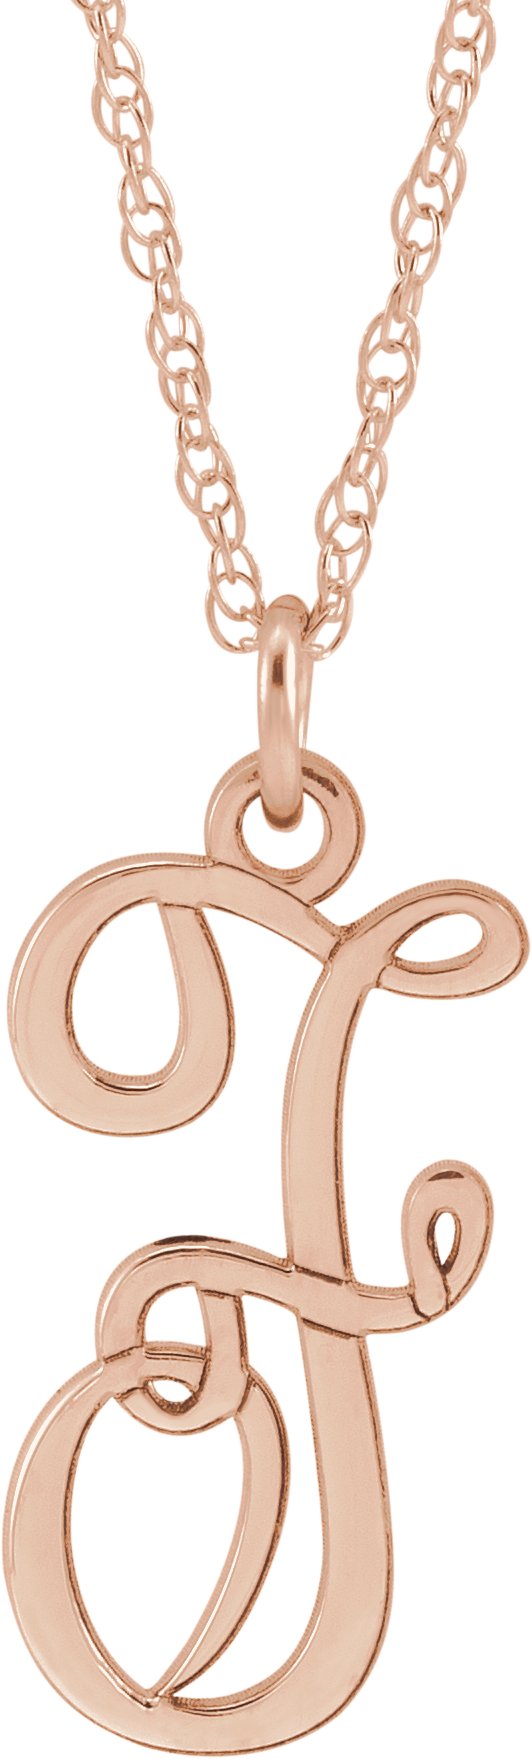 14K Rose Gold-Plated Sterling Silver Script Initial F 16-18" Necklace